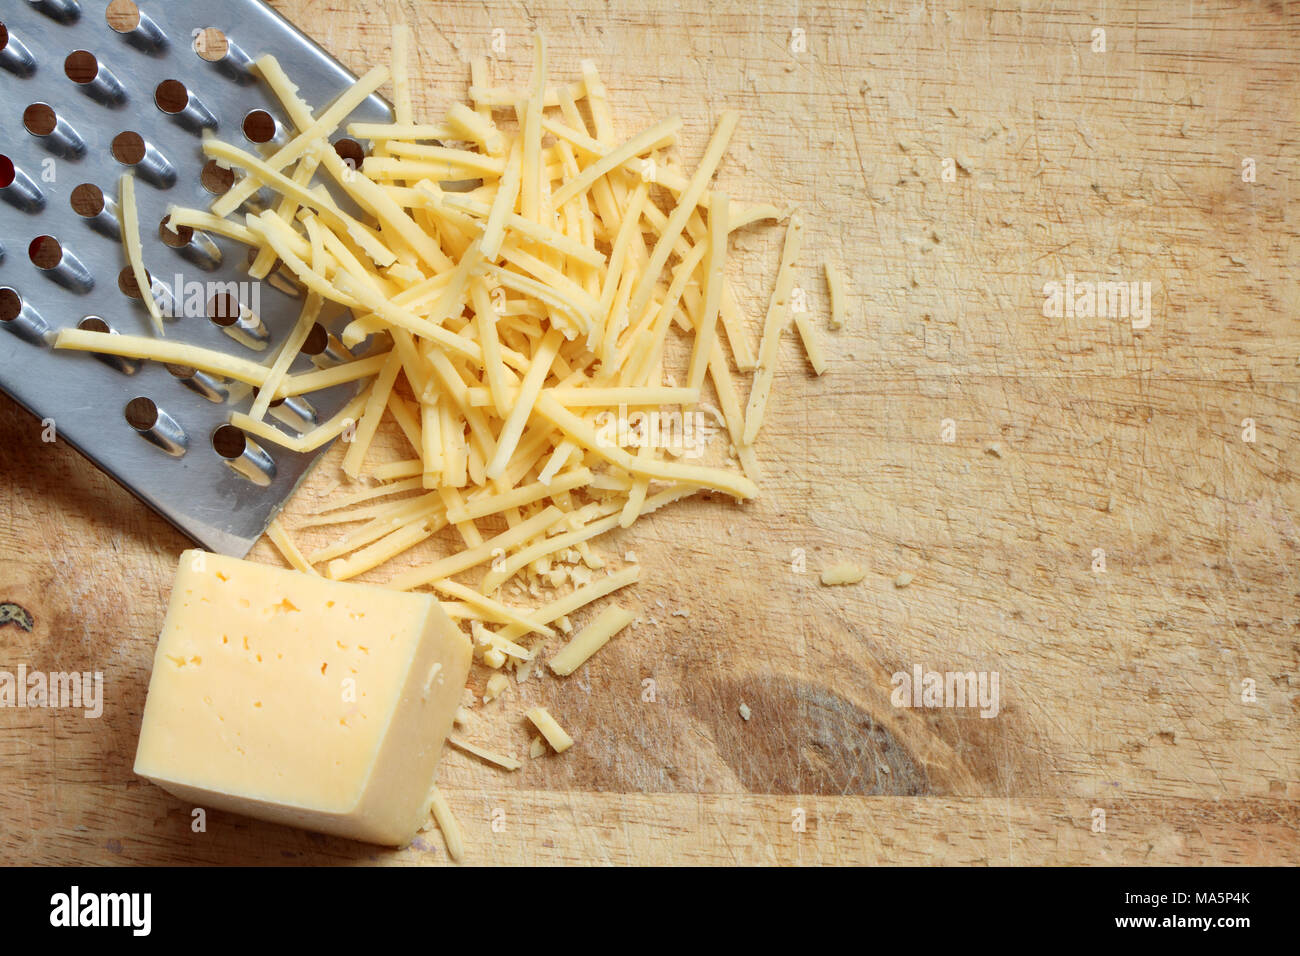 Closeup of grated cheese and grater lying on wooden cutting board Stock Photo